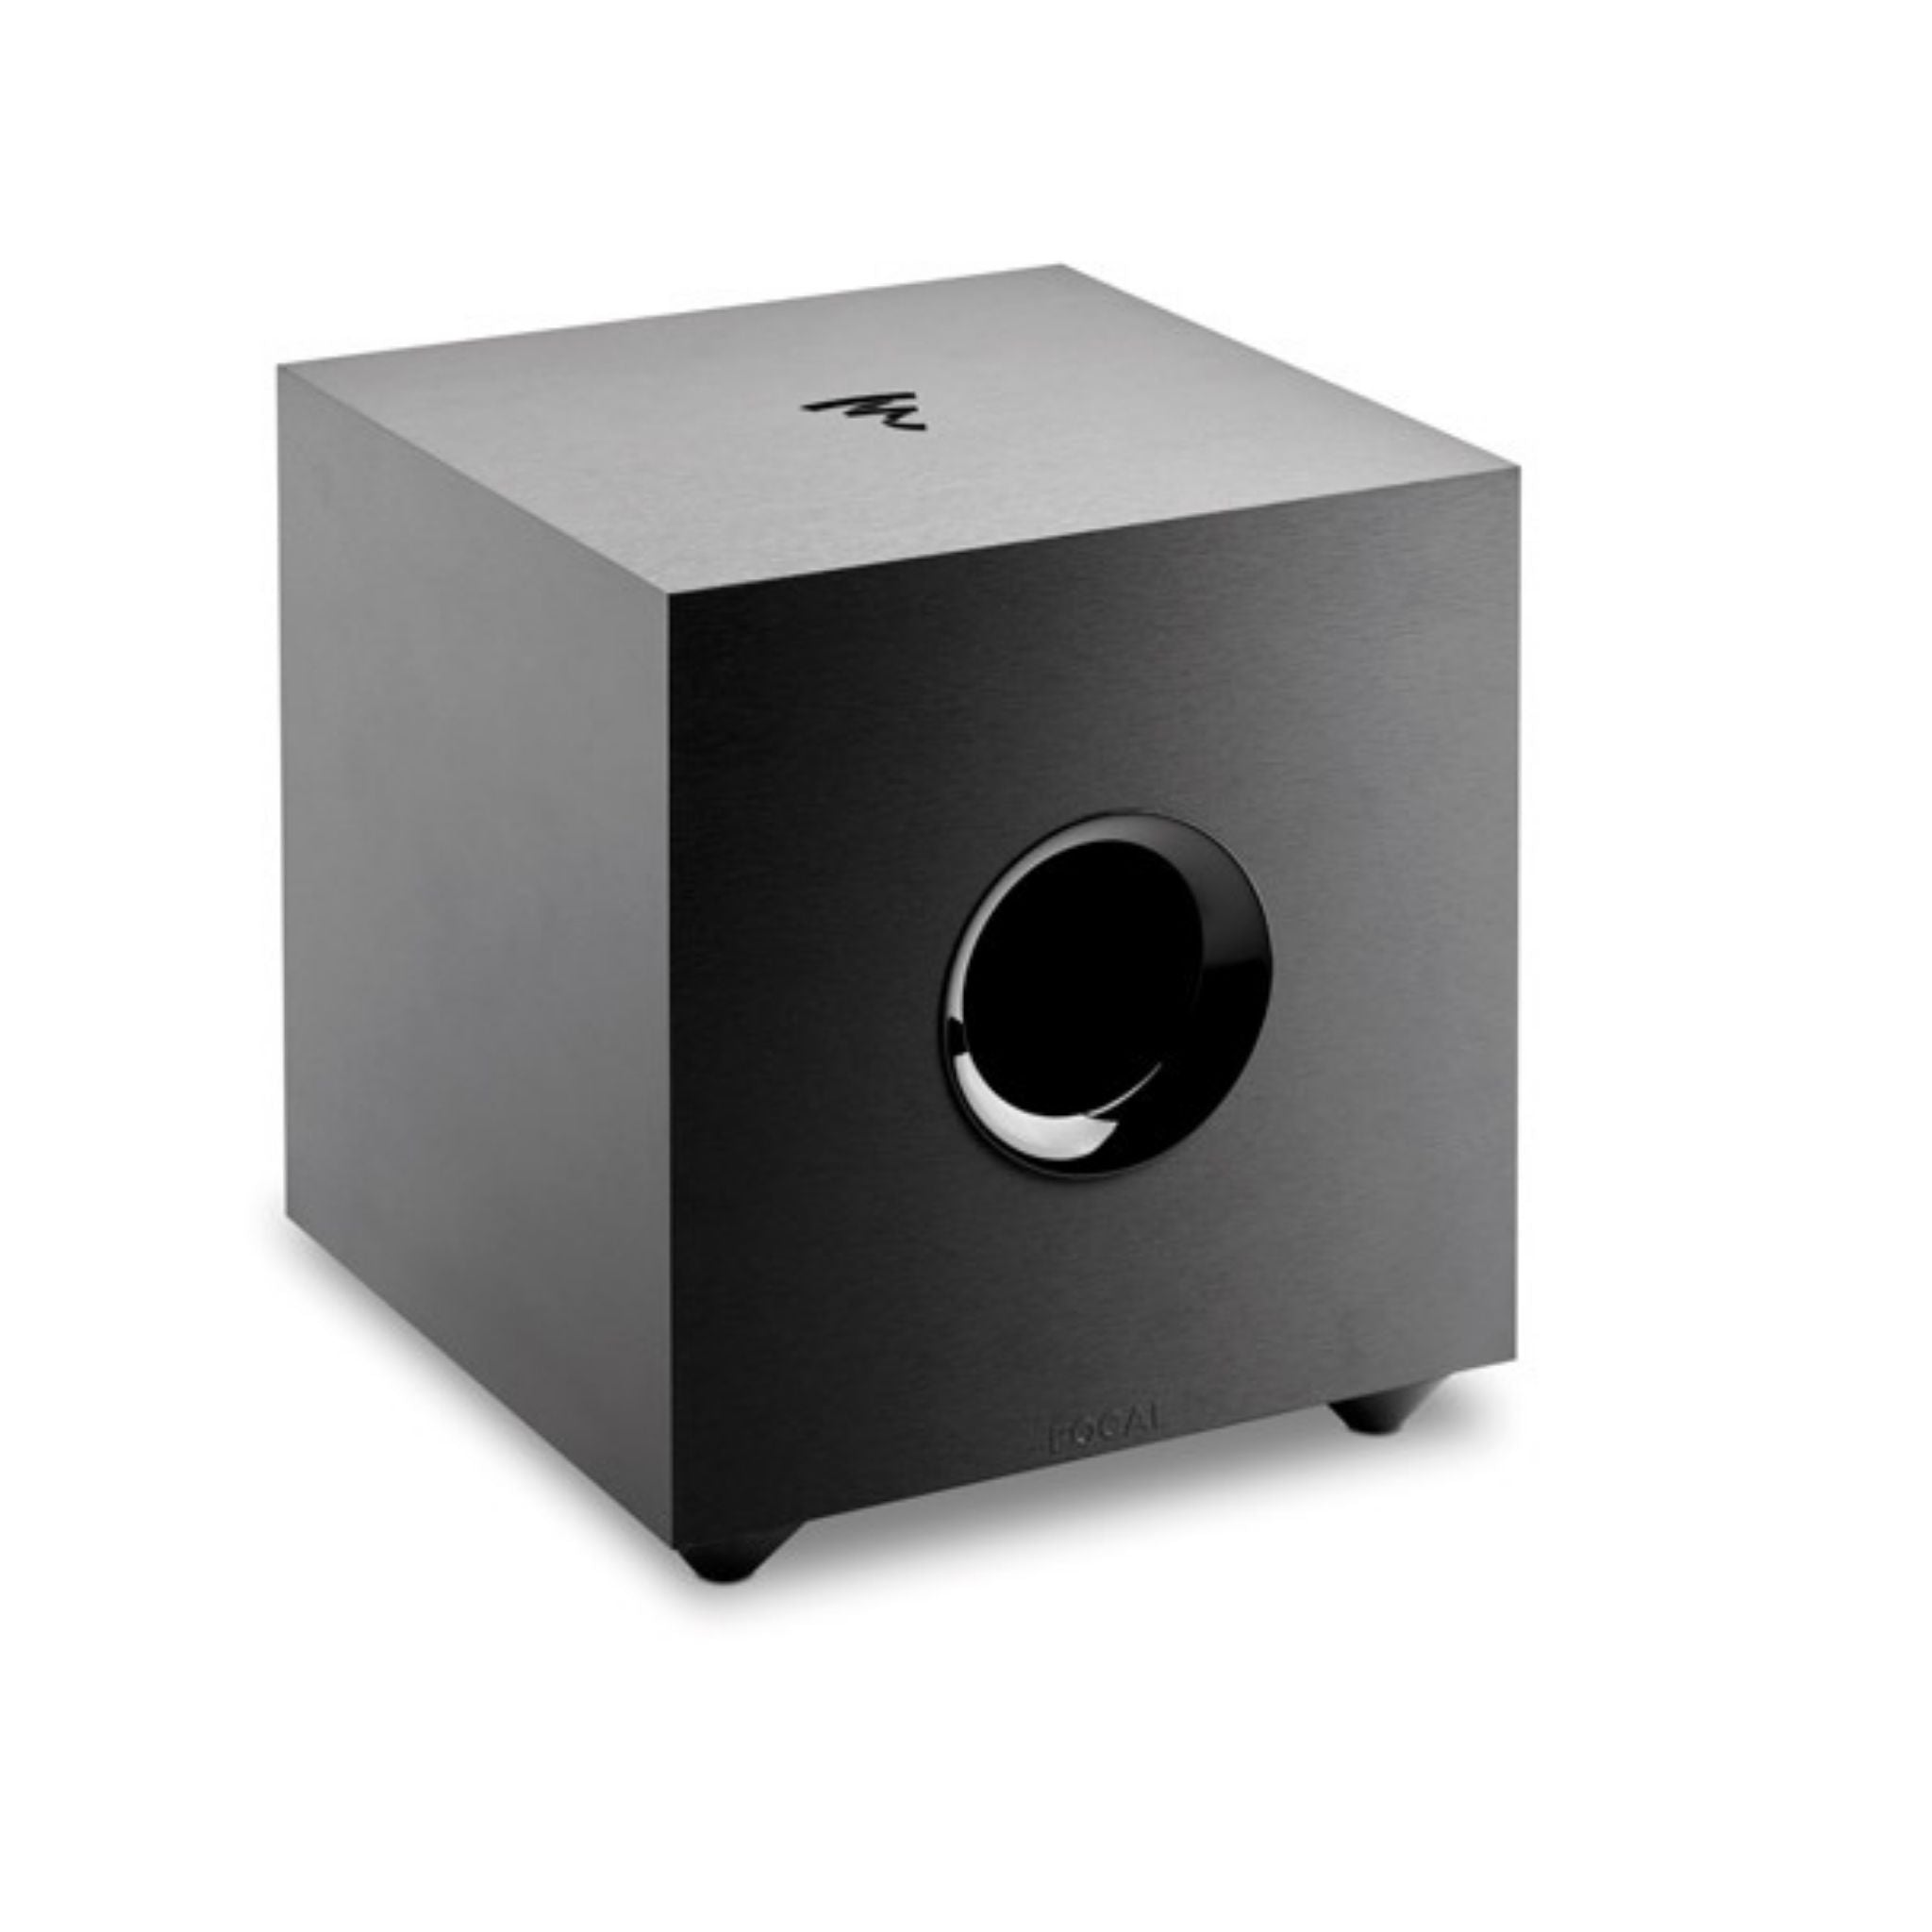 Focal Sib 2.0 specifications